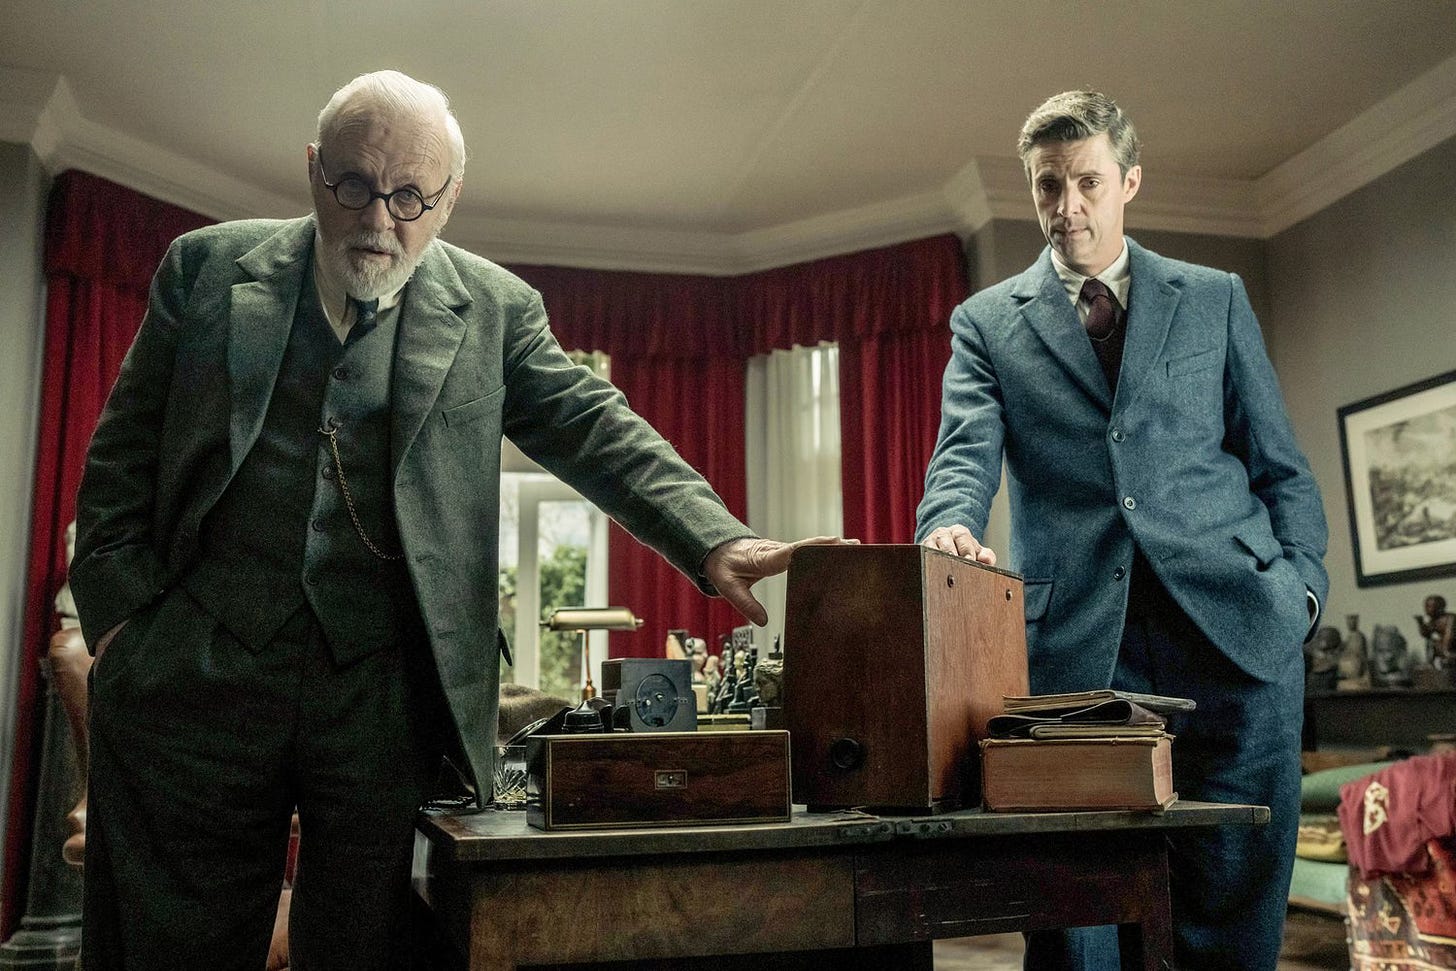 Still from the film Freud's Last Session featuring Anthony Hopkins and Matthew Goode